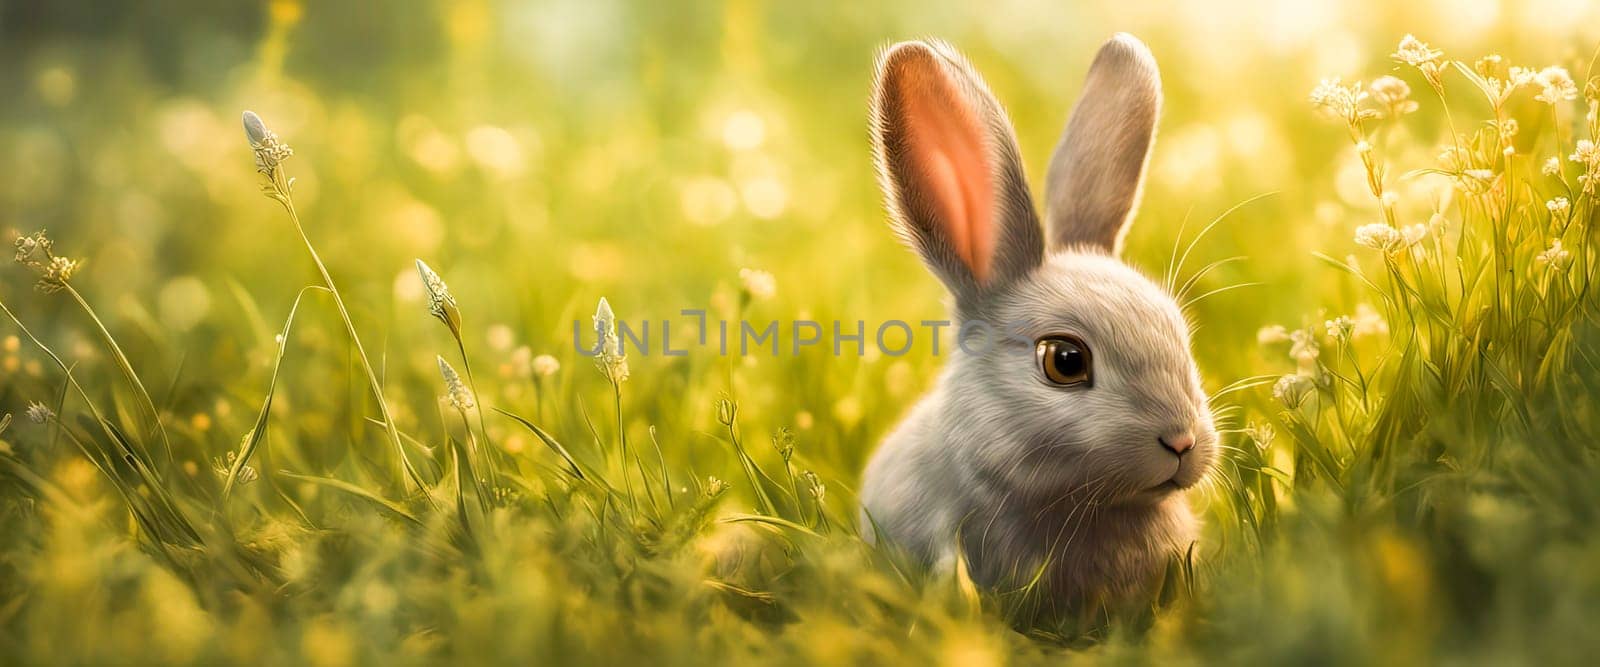 Cute adorable fluffy rabbit sitting on green grass lawn at backyard. Small sweet bunny walking by meadow in green garden on bright sunny day. Easter nature and animal bokeh background